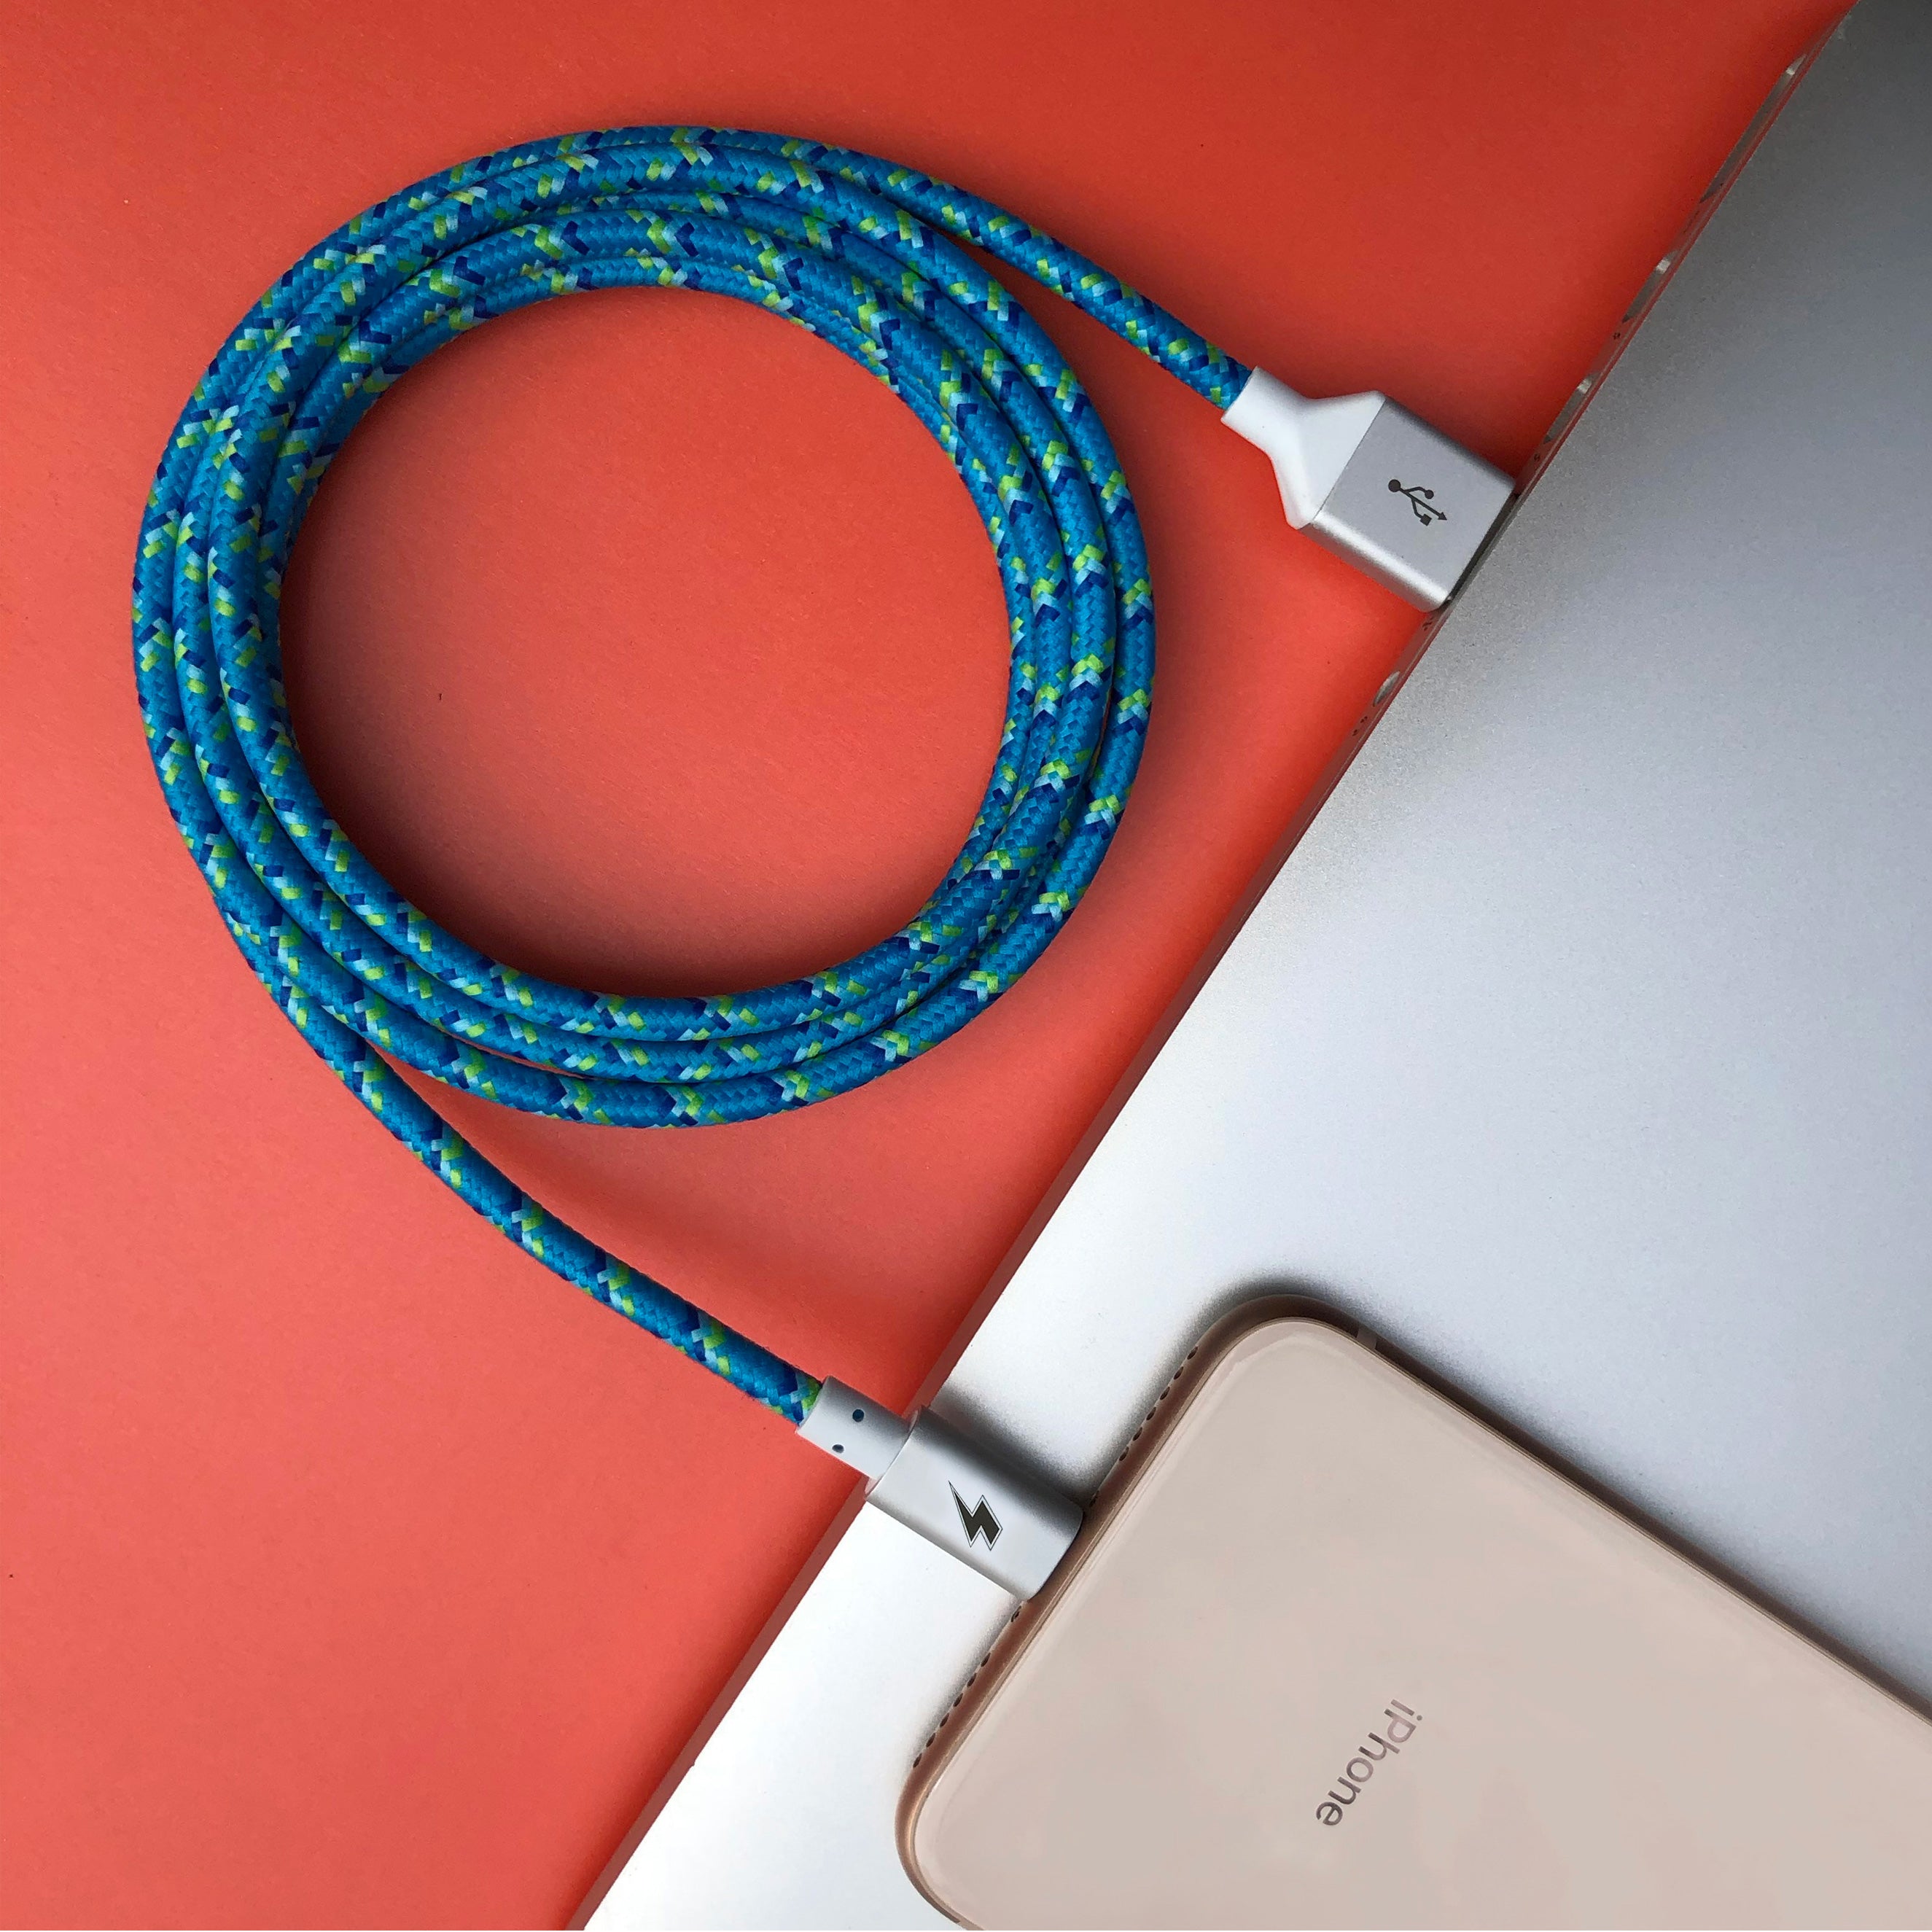 Rainbow Lightning Cable [10 ft / 3m length] – Charge Cords